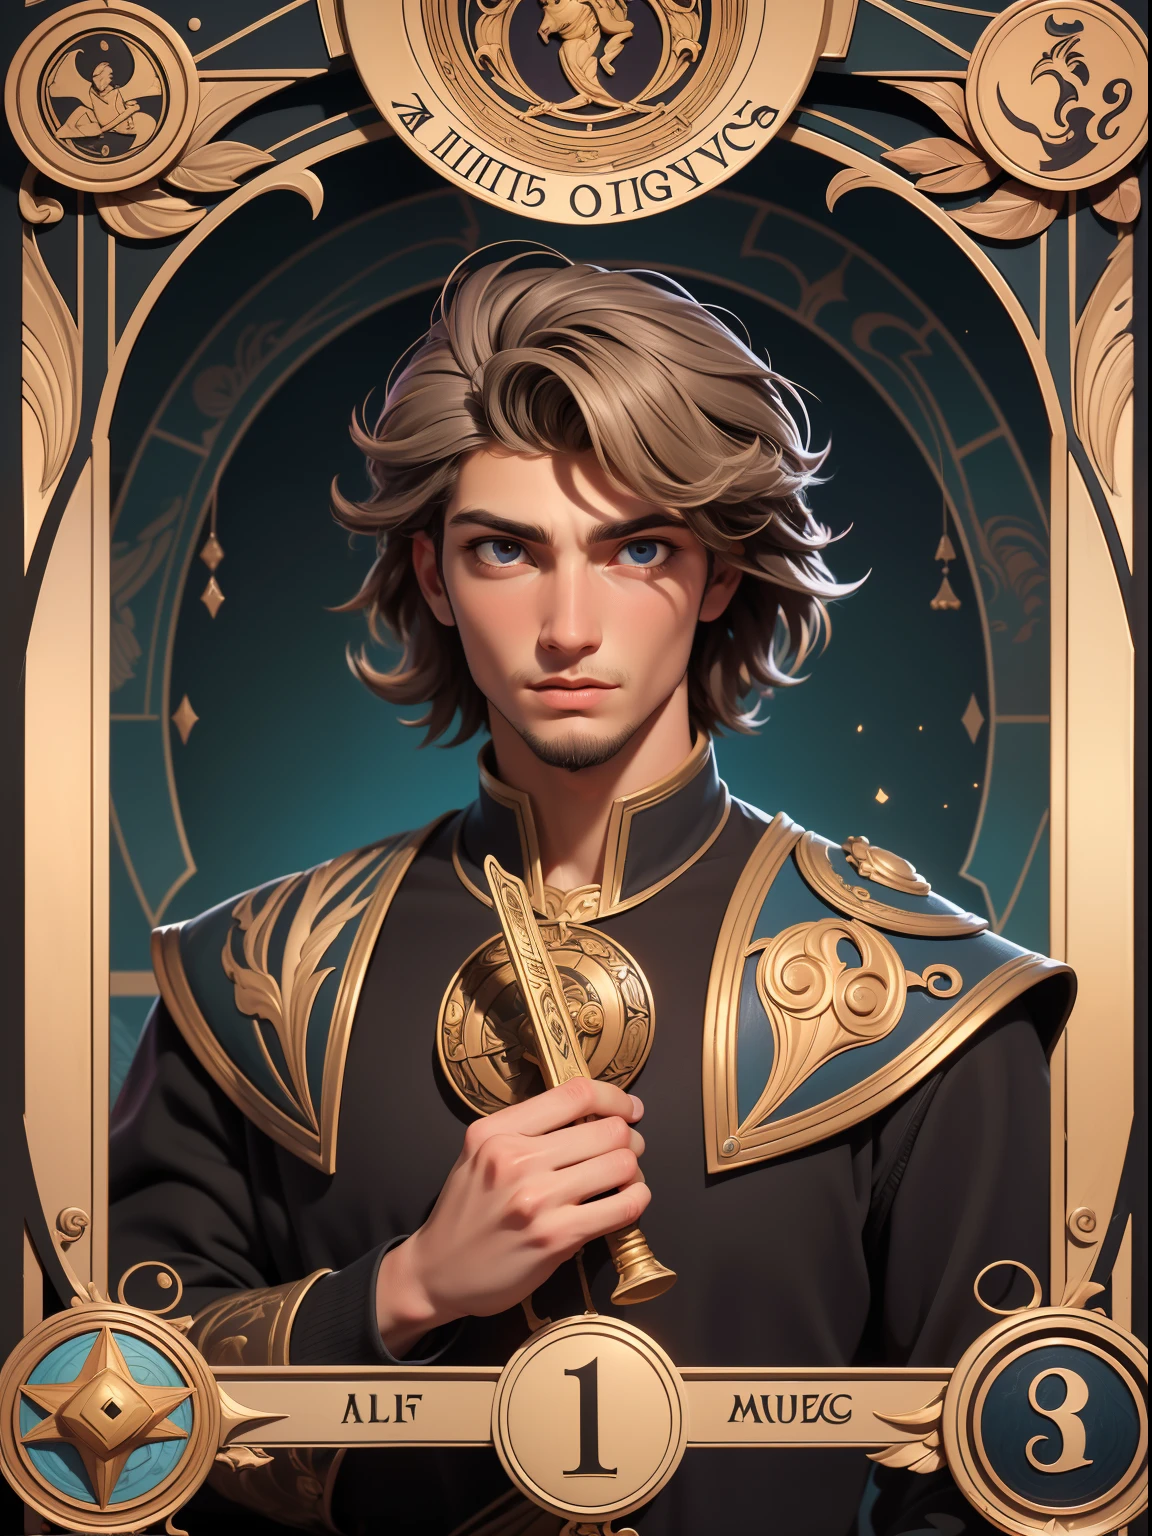 (absurdres, highres, ultra detailed), 1 young male, adult, handsome, short hair, finely detailed eyes and detailed face, the knights \tarot\, Symbolism, Visual art, Occult, Universal, Vision casting, Philosophical, Iconography, Numerology, Popularity, Artistic, Alfons Mucha